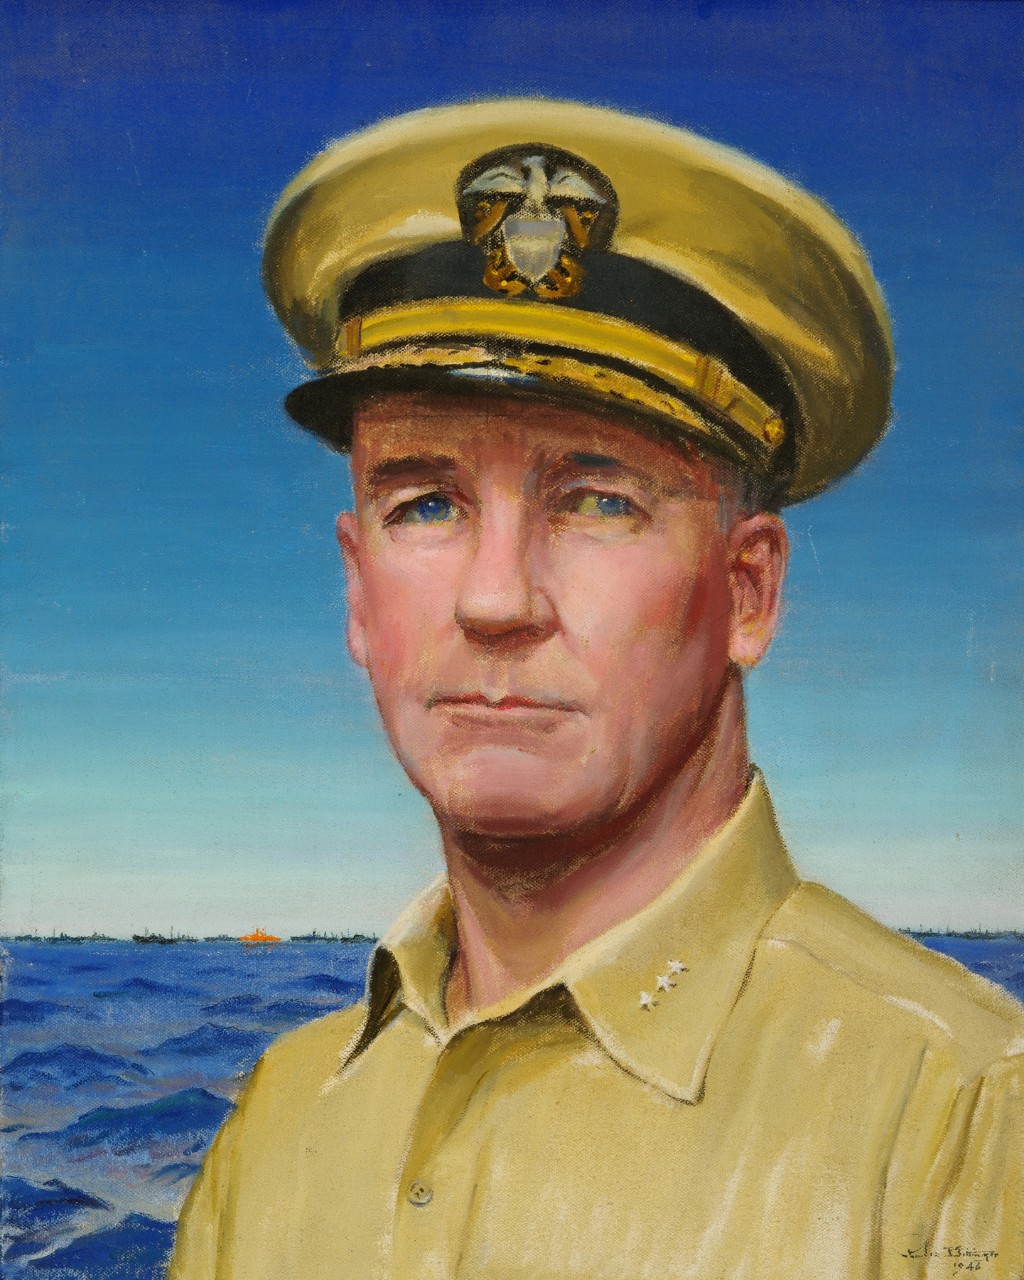 Portrait of a three star admiral with a fleet in the far background